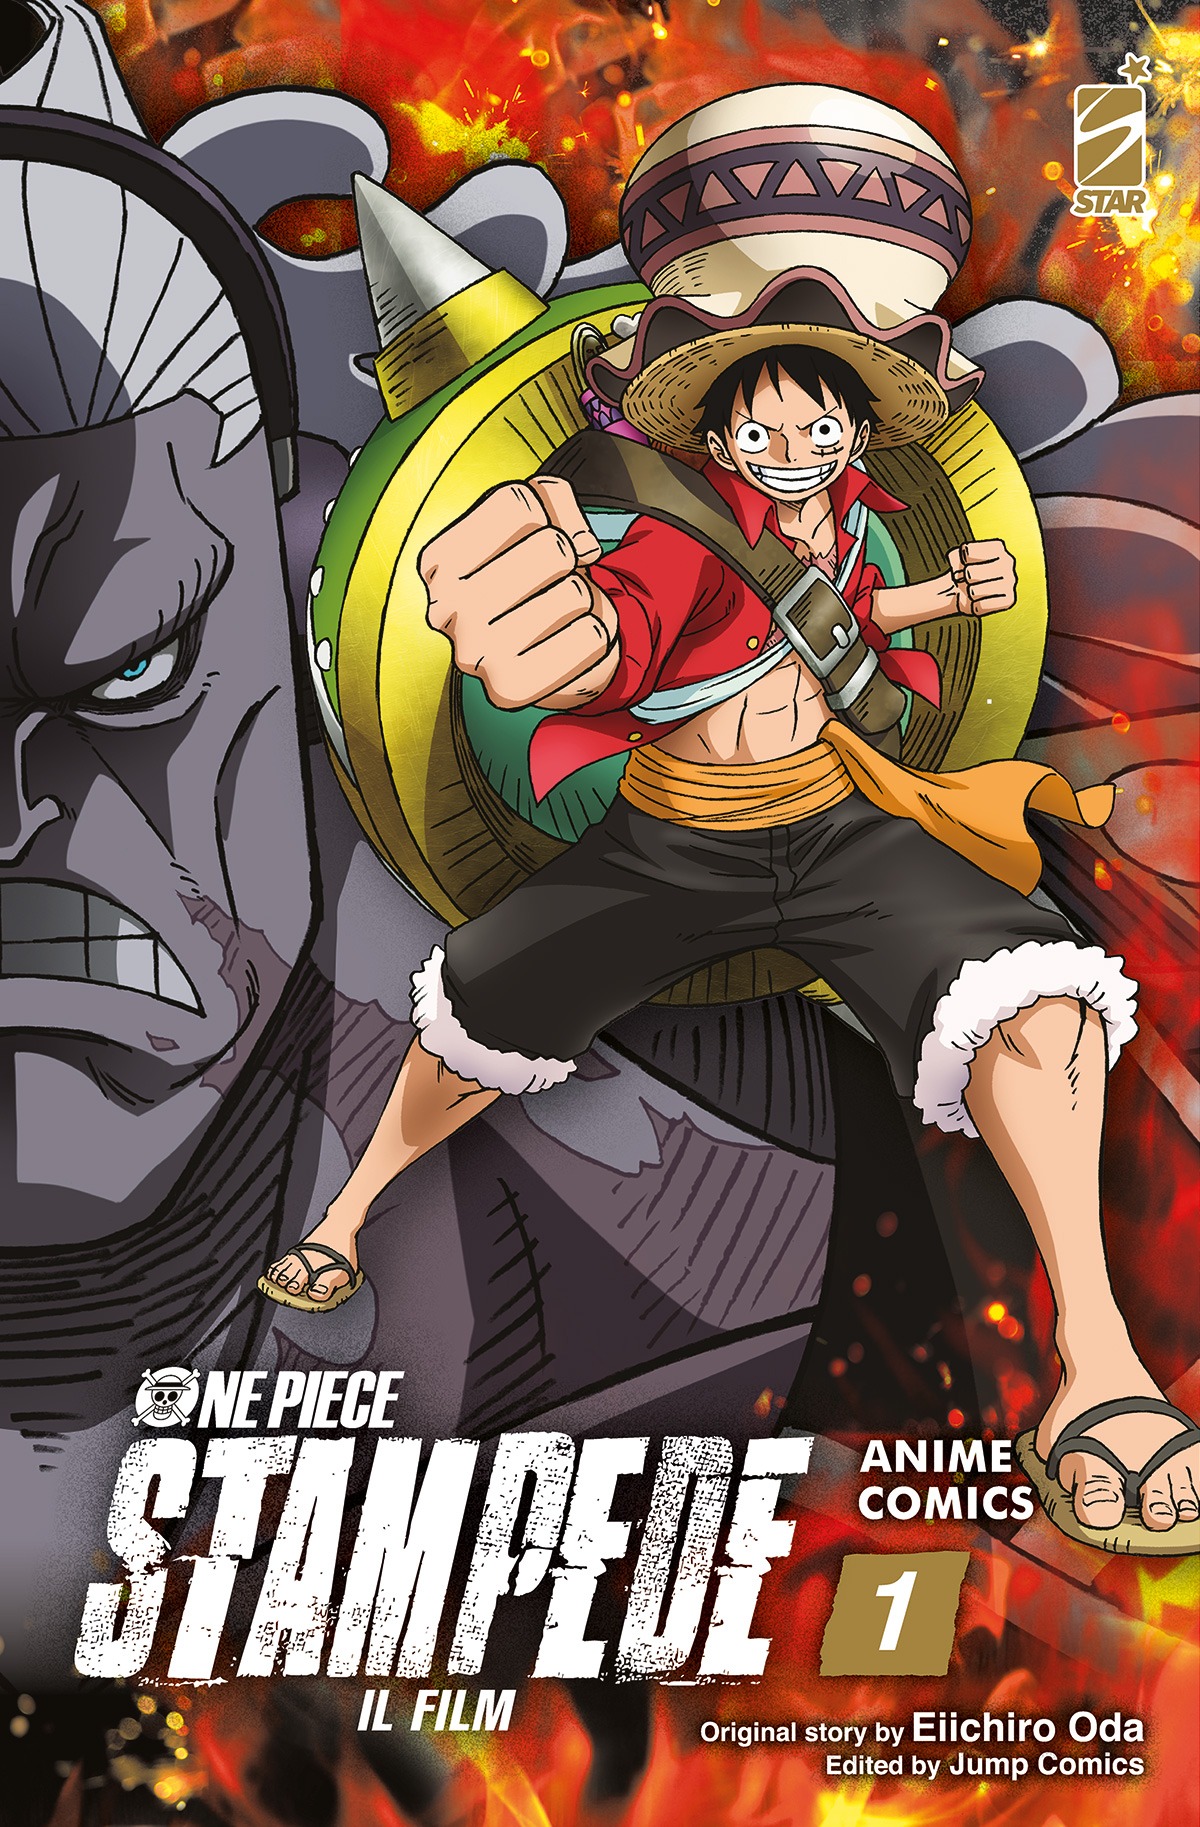 One Piece Stampede Il Film Anime Comics N 1 Mangamania